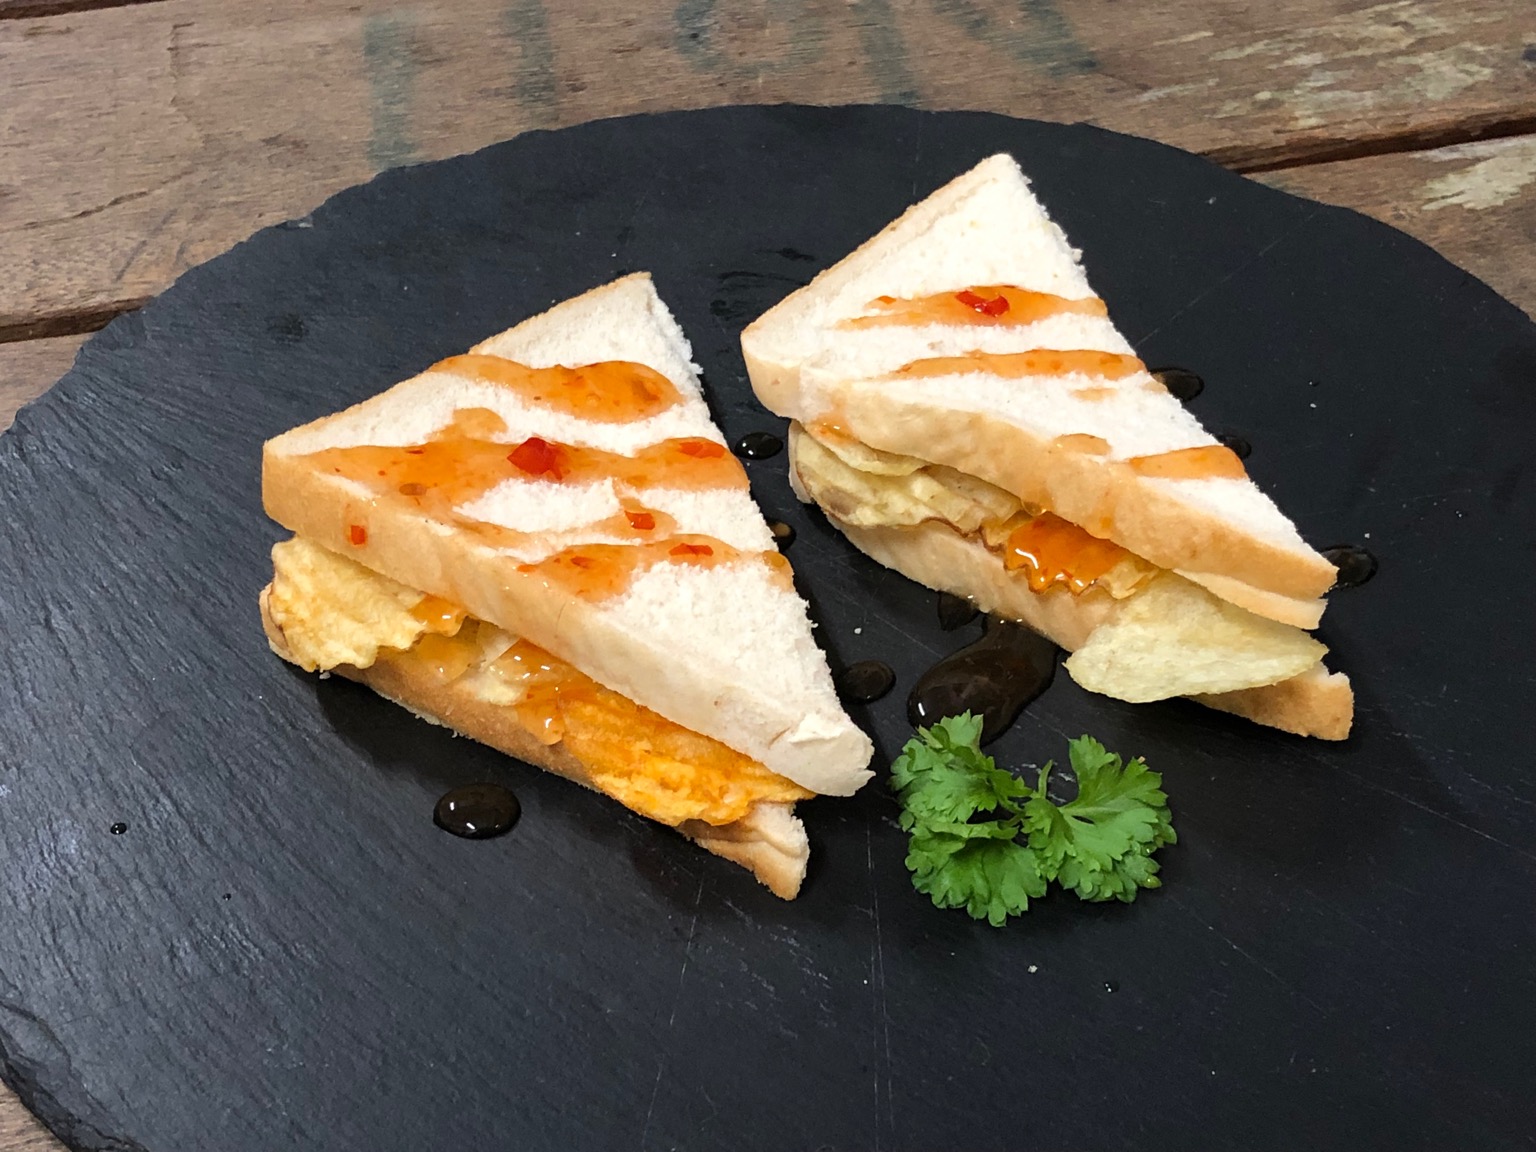 Crisps in white bread with drizzle and garnish